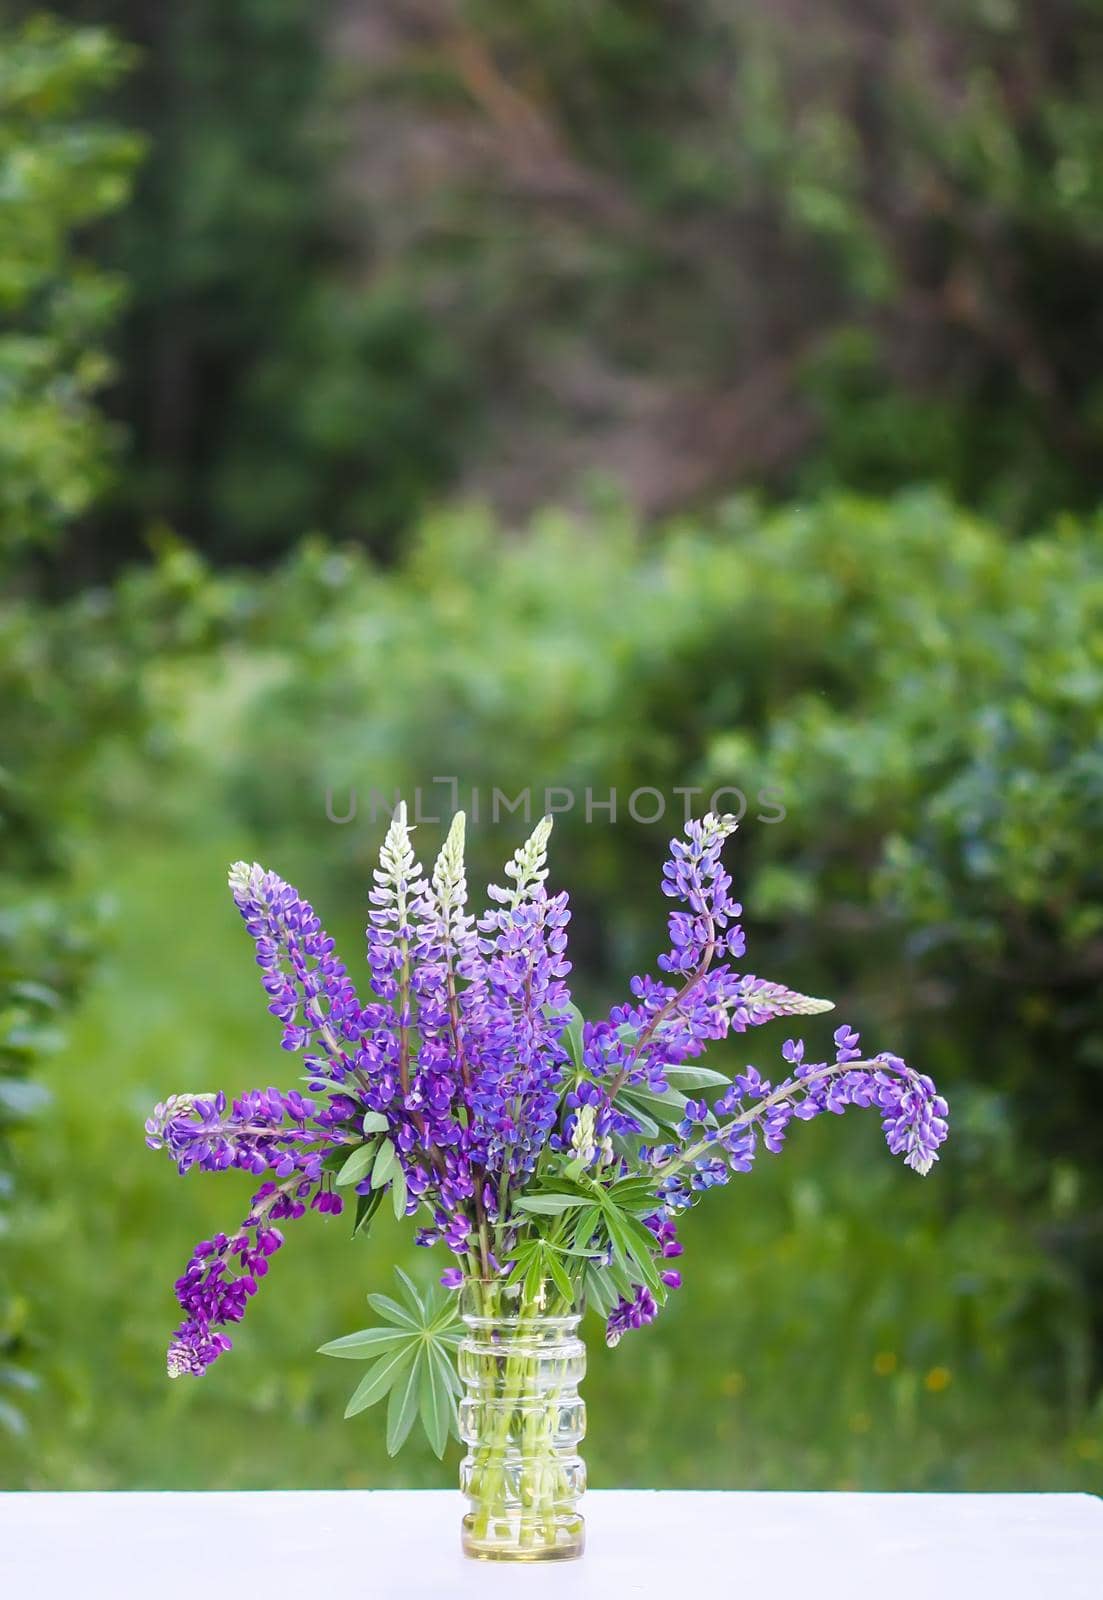 Bouquet of summer flowers outdoors. Large-leaved or Bigleaf Lupine flowers. Lupinus polyphyllus plants. by nightlyviolet